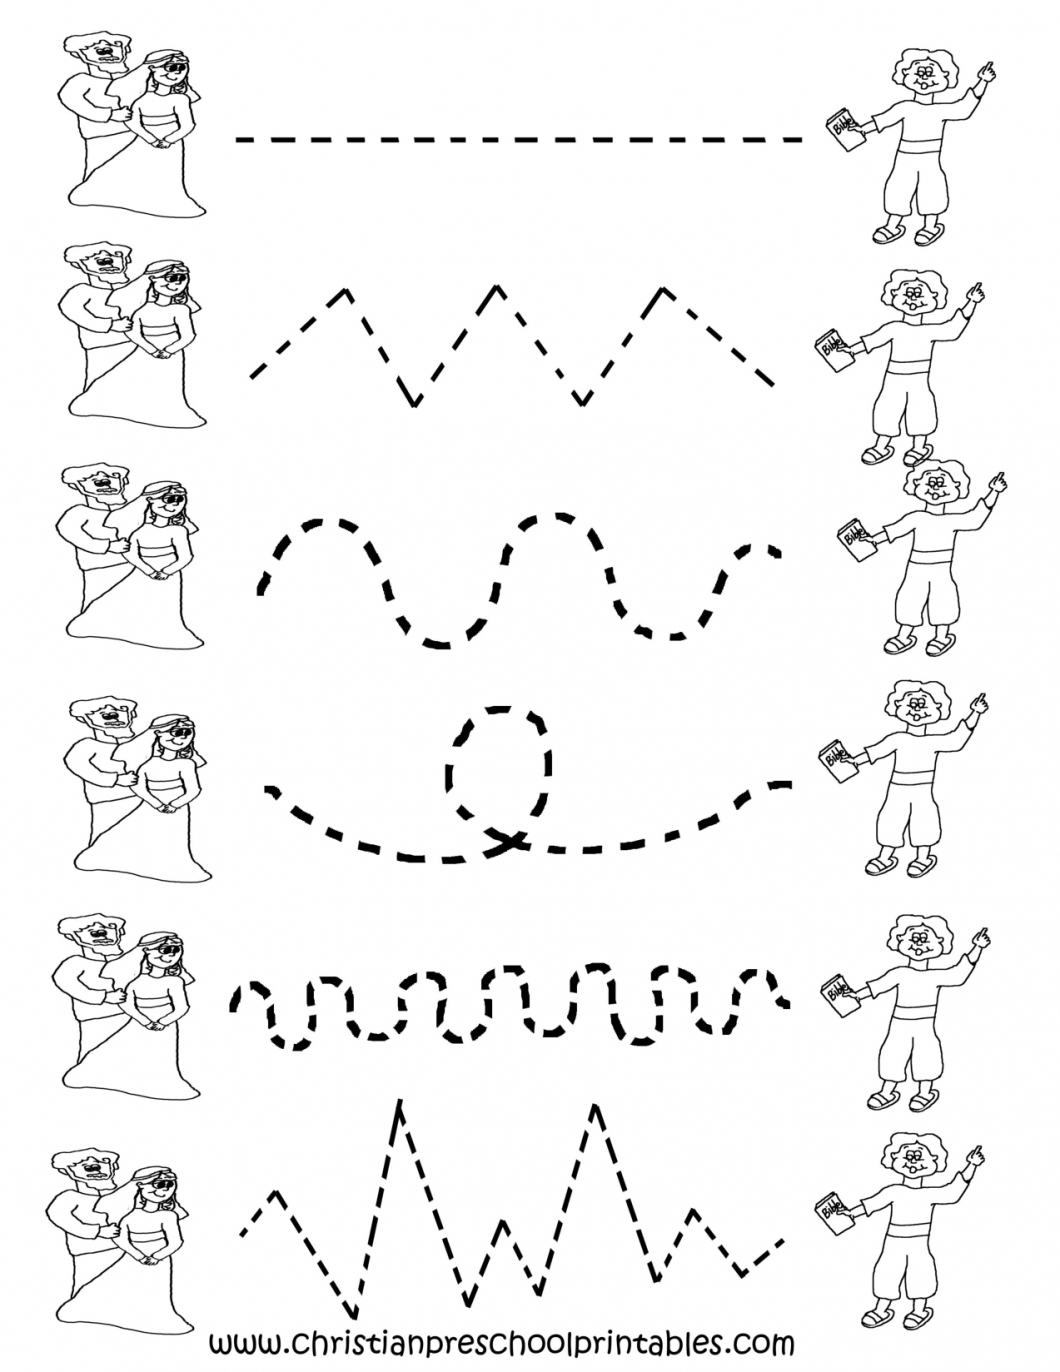 Free Printable Tracing Worksheets For Preschoolers Lexia s Blog